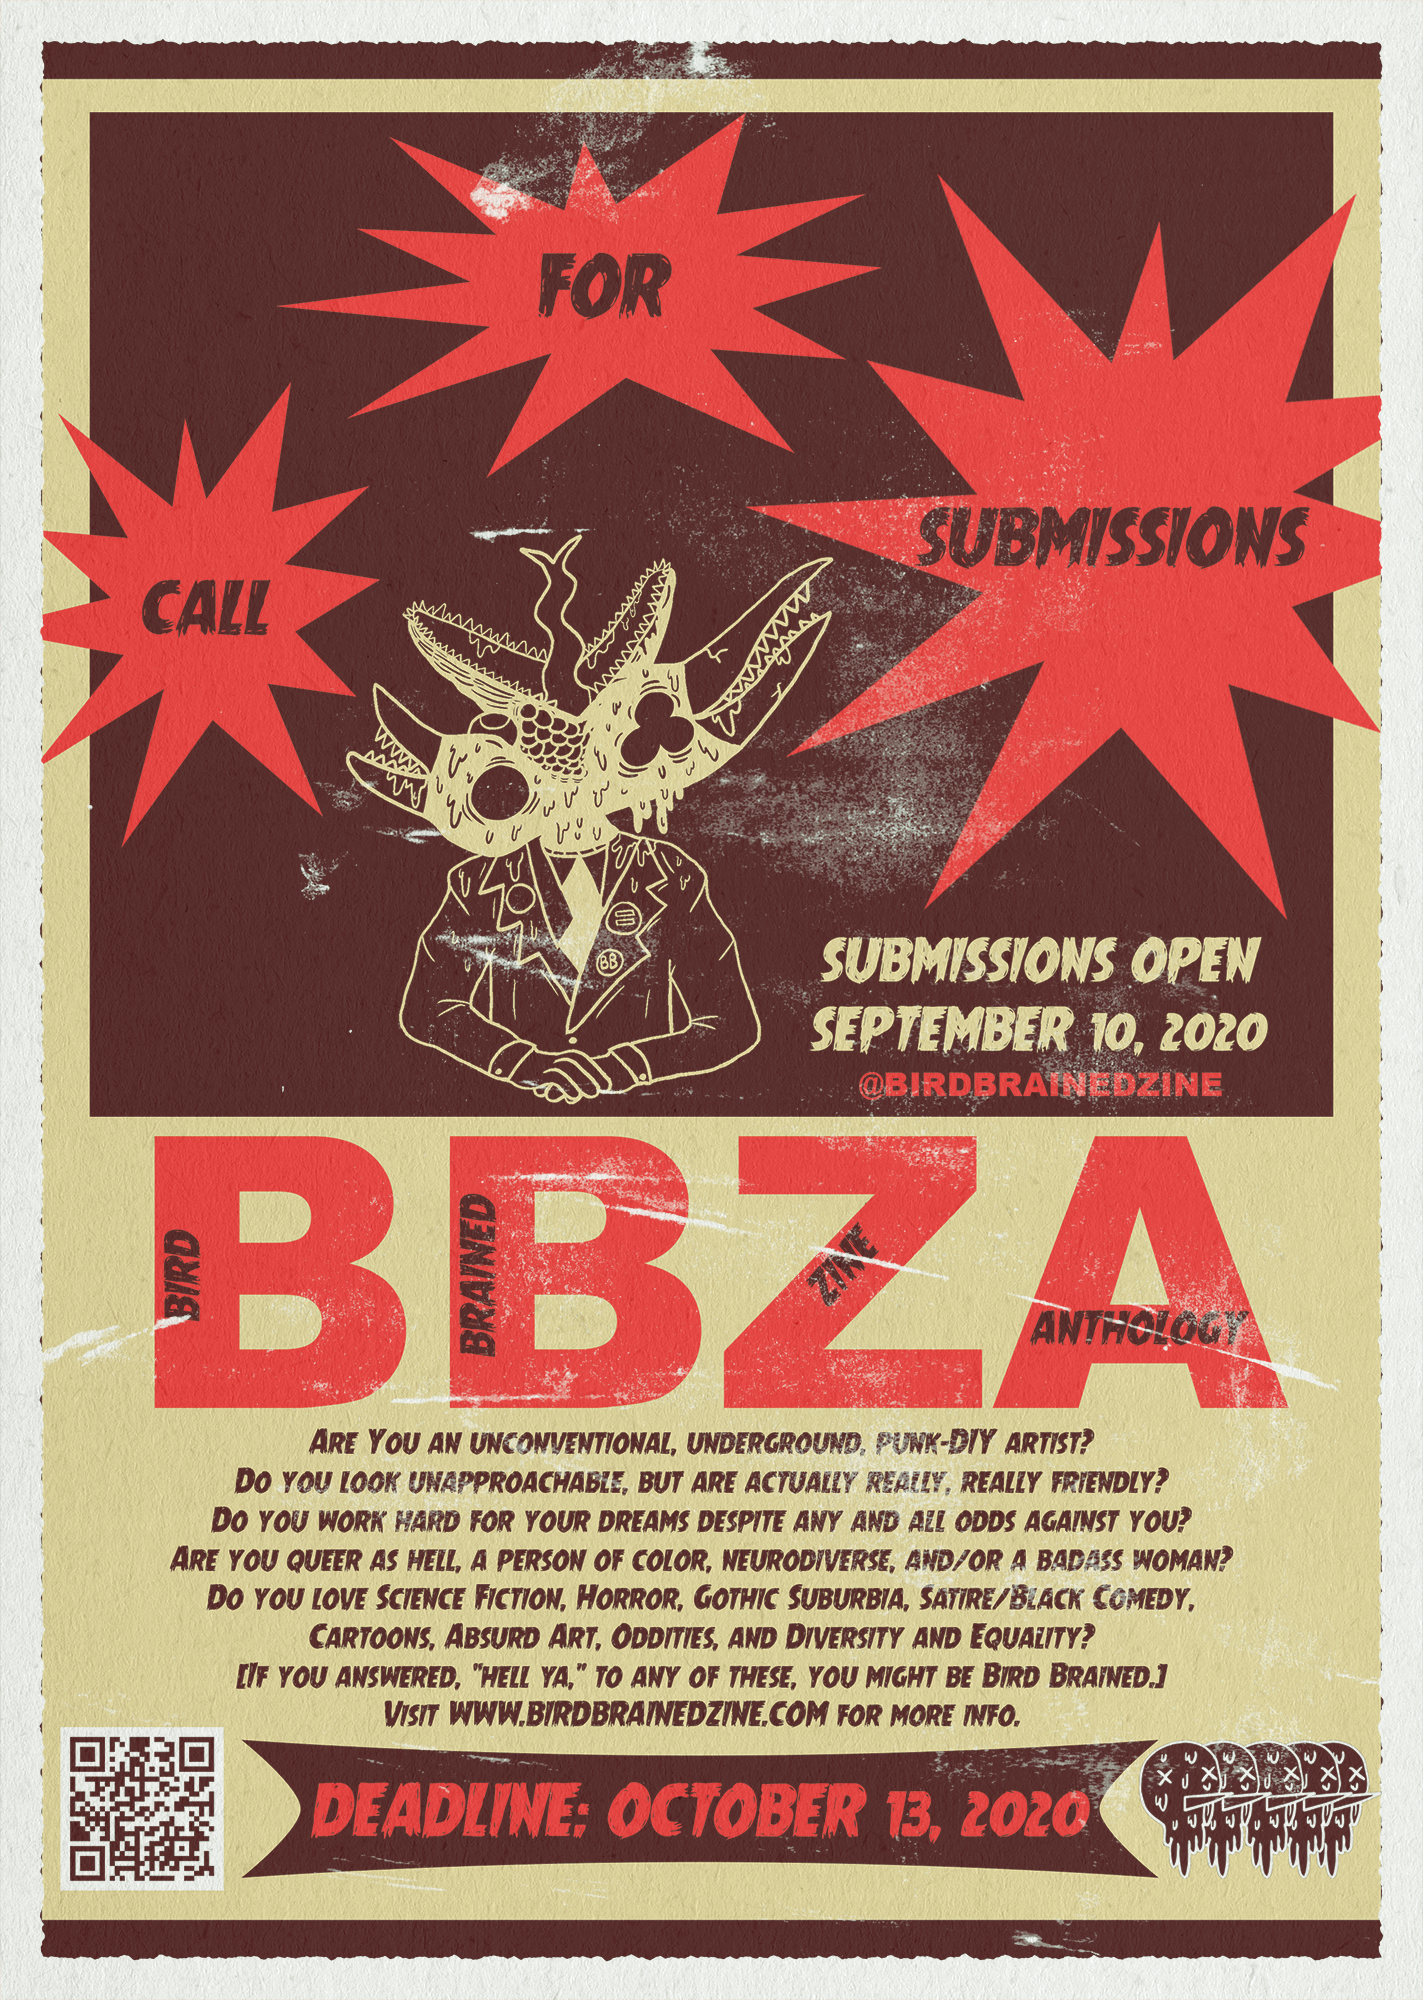 “Bird Brained” Call for Submissions Ad